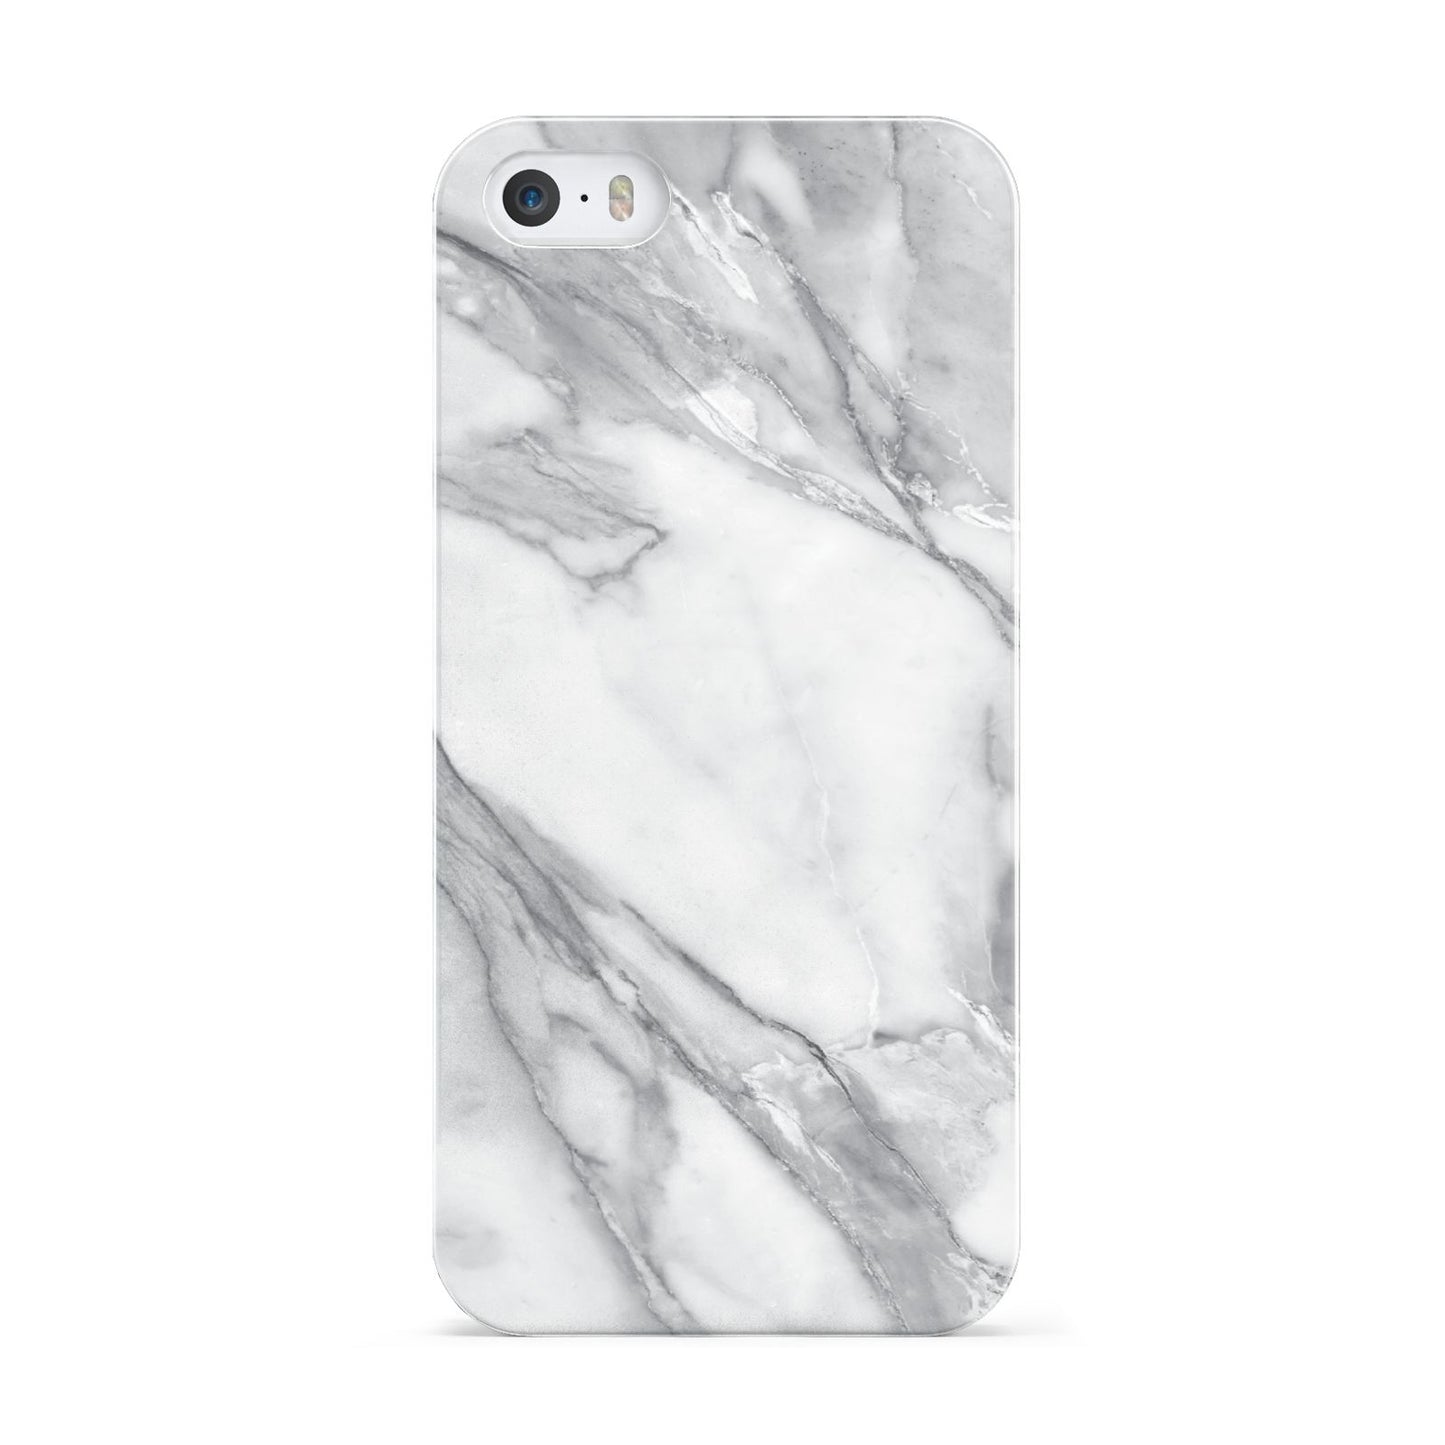 Faux Marble Effect White Grey Apple iPhone 5 Case